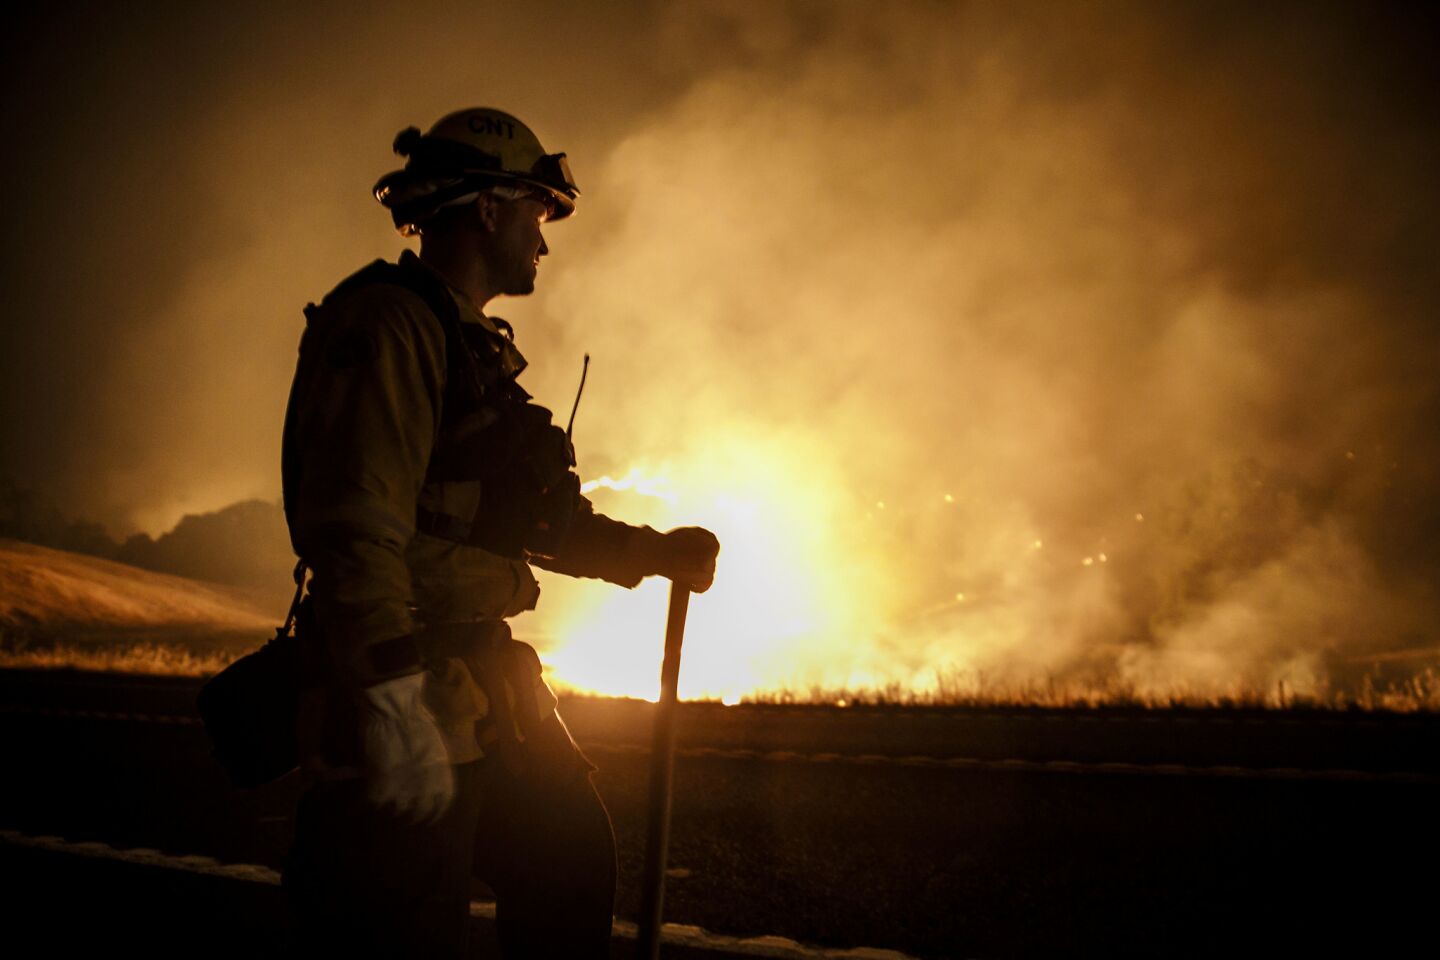 A firefighter monitors a controlled burn along California 20 in Upper Lake on July 31. The Ranch and River fires are burning together as the Mendocino complex fires.